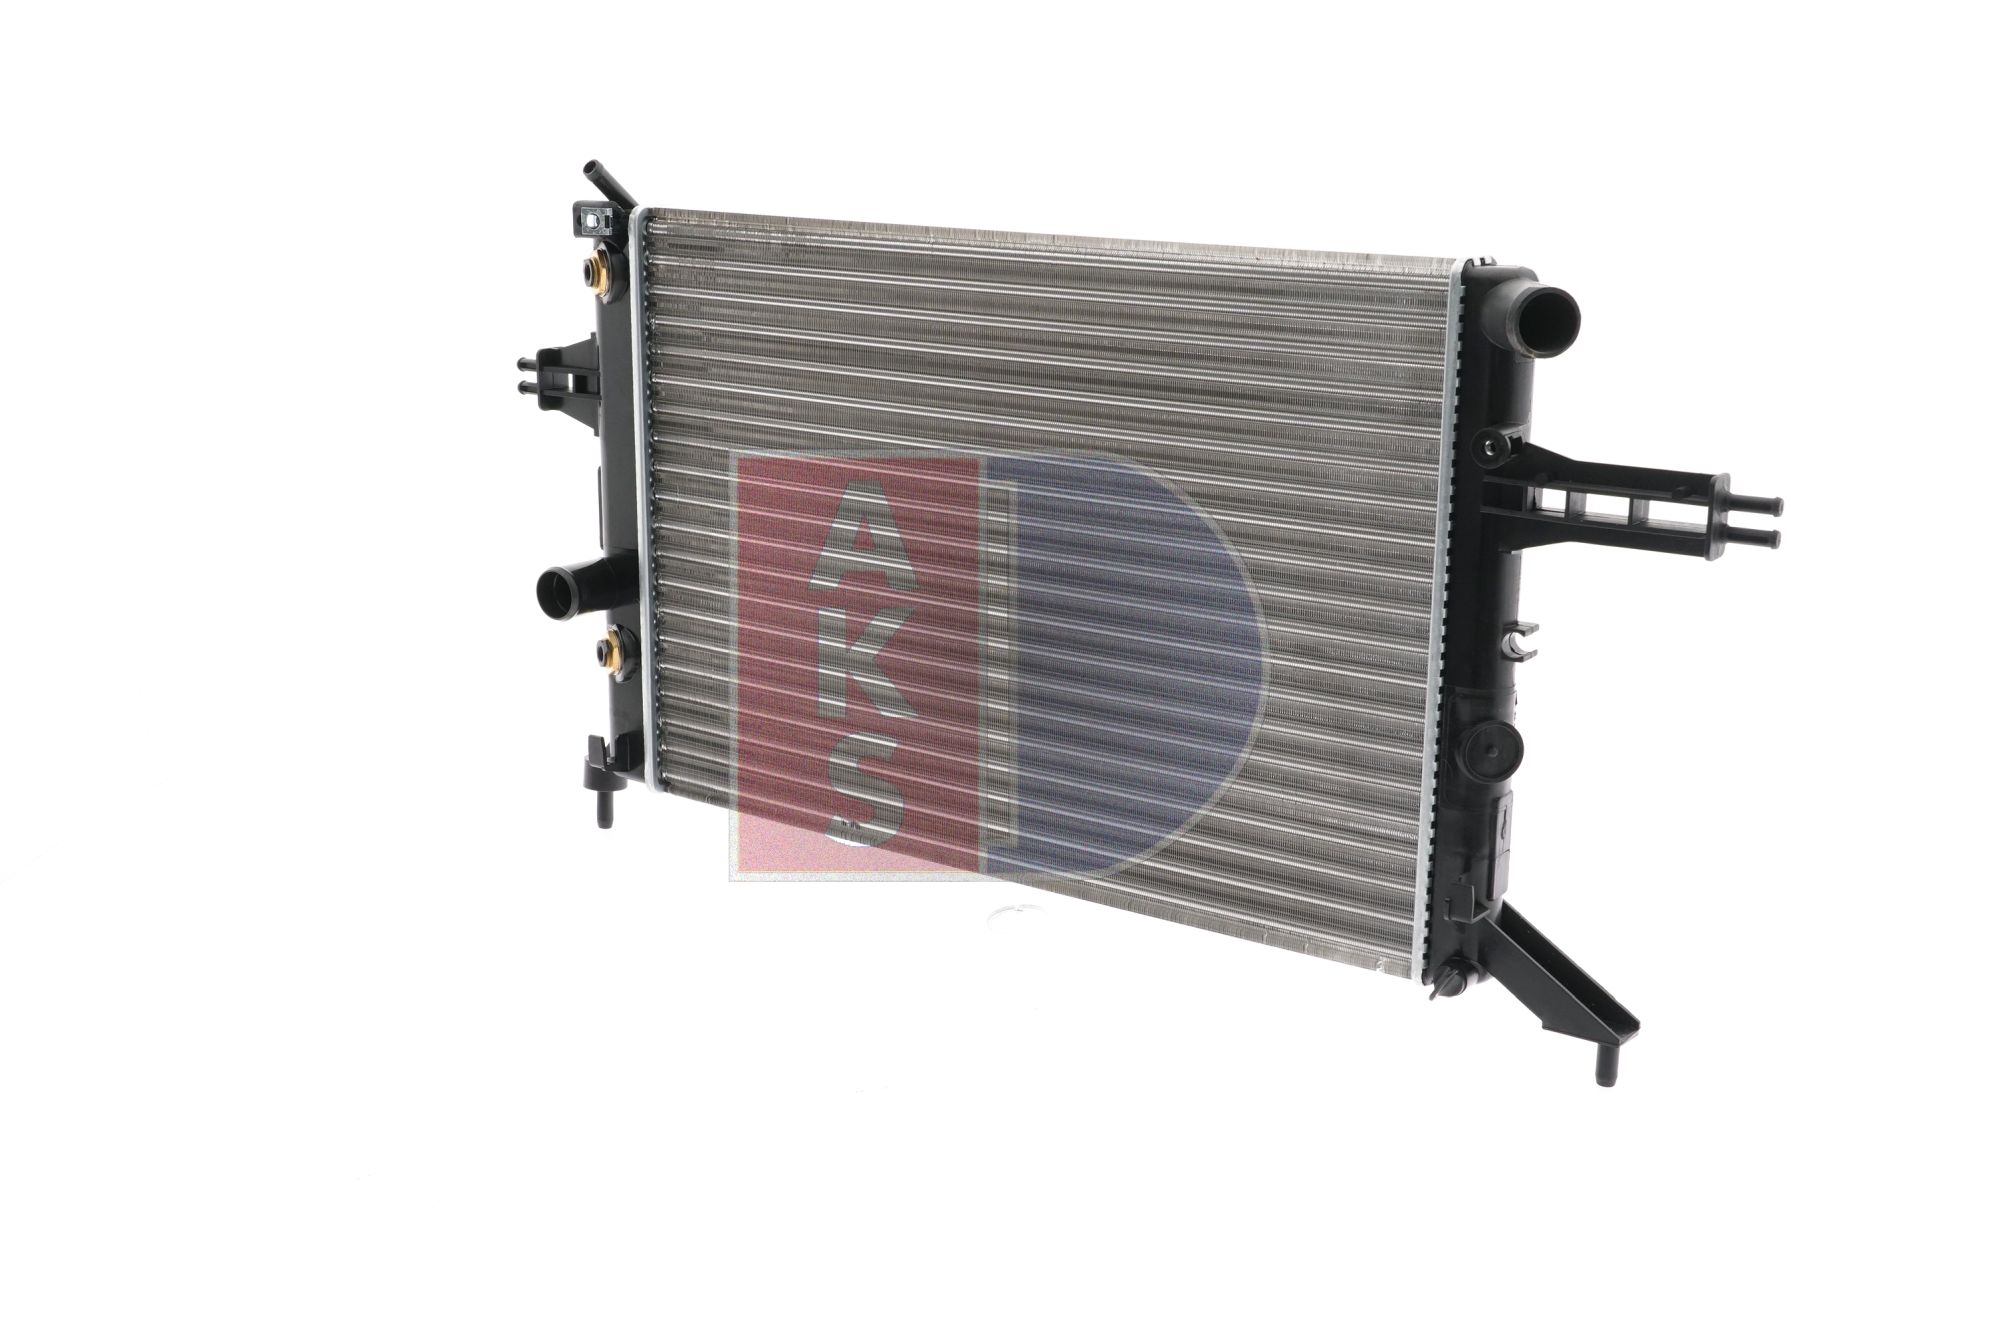 AKS DASIS 151980N Engine radiator 540 x 377 x 23 mm, Mechanically jointed cooling fins